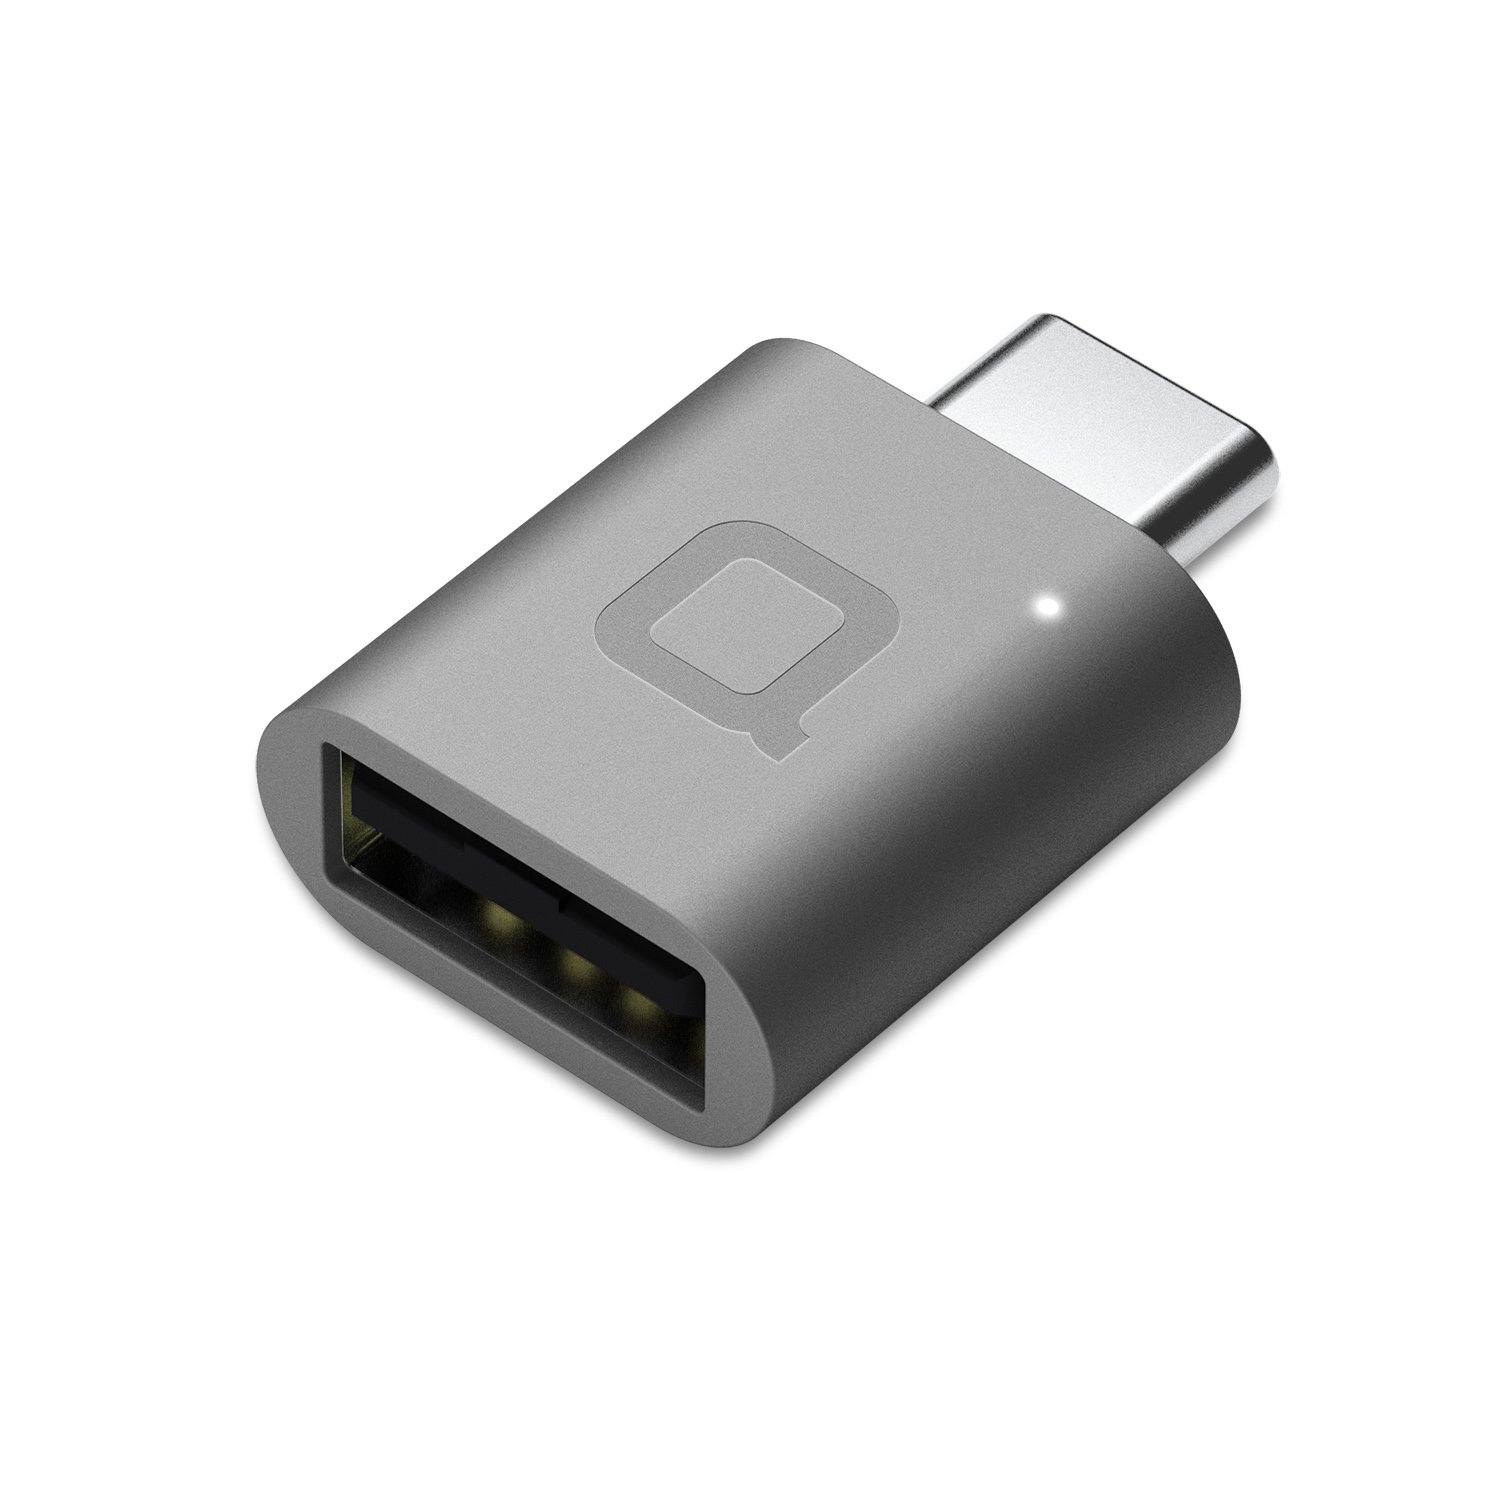 What Is A Usb Adapter